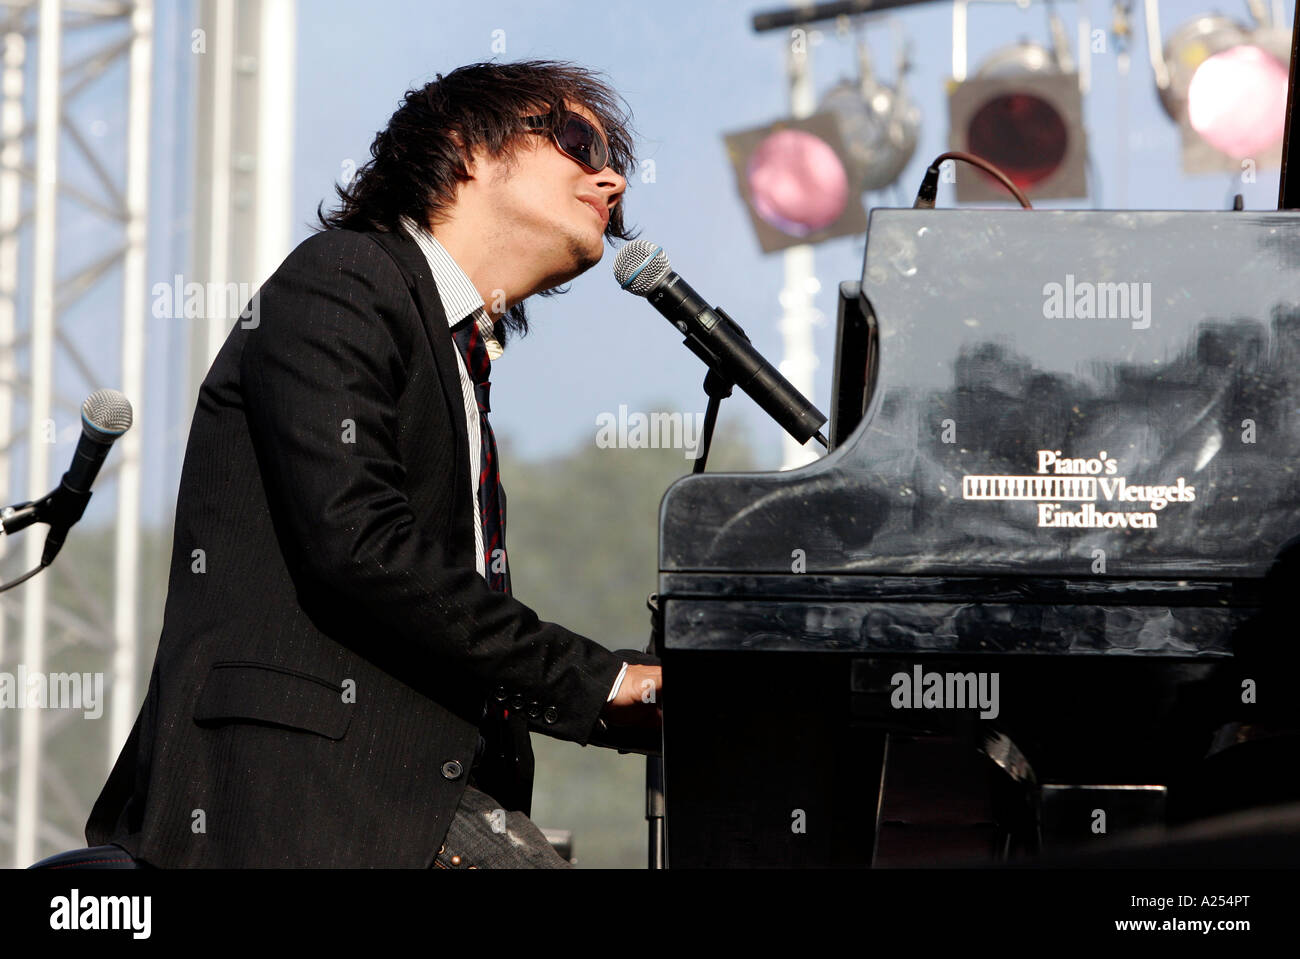 HOLLAND THE HAGUE British singer songwriter and pianist Jamie Cullum  performing on stage at the annual event Jazz in the Park Stock Photo - Alamy